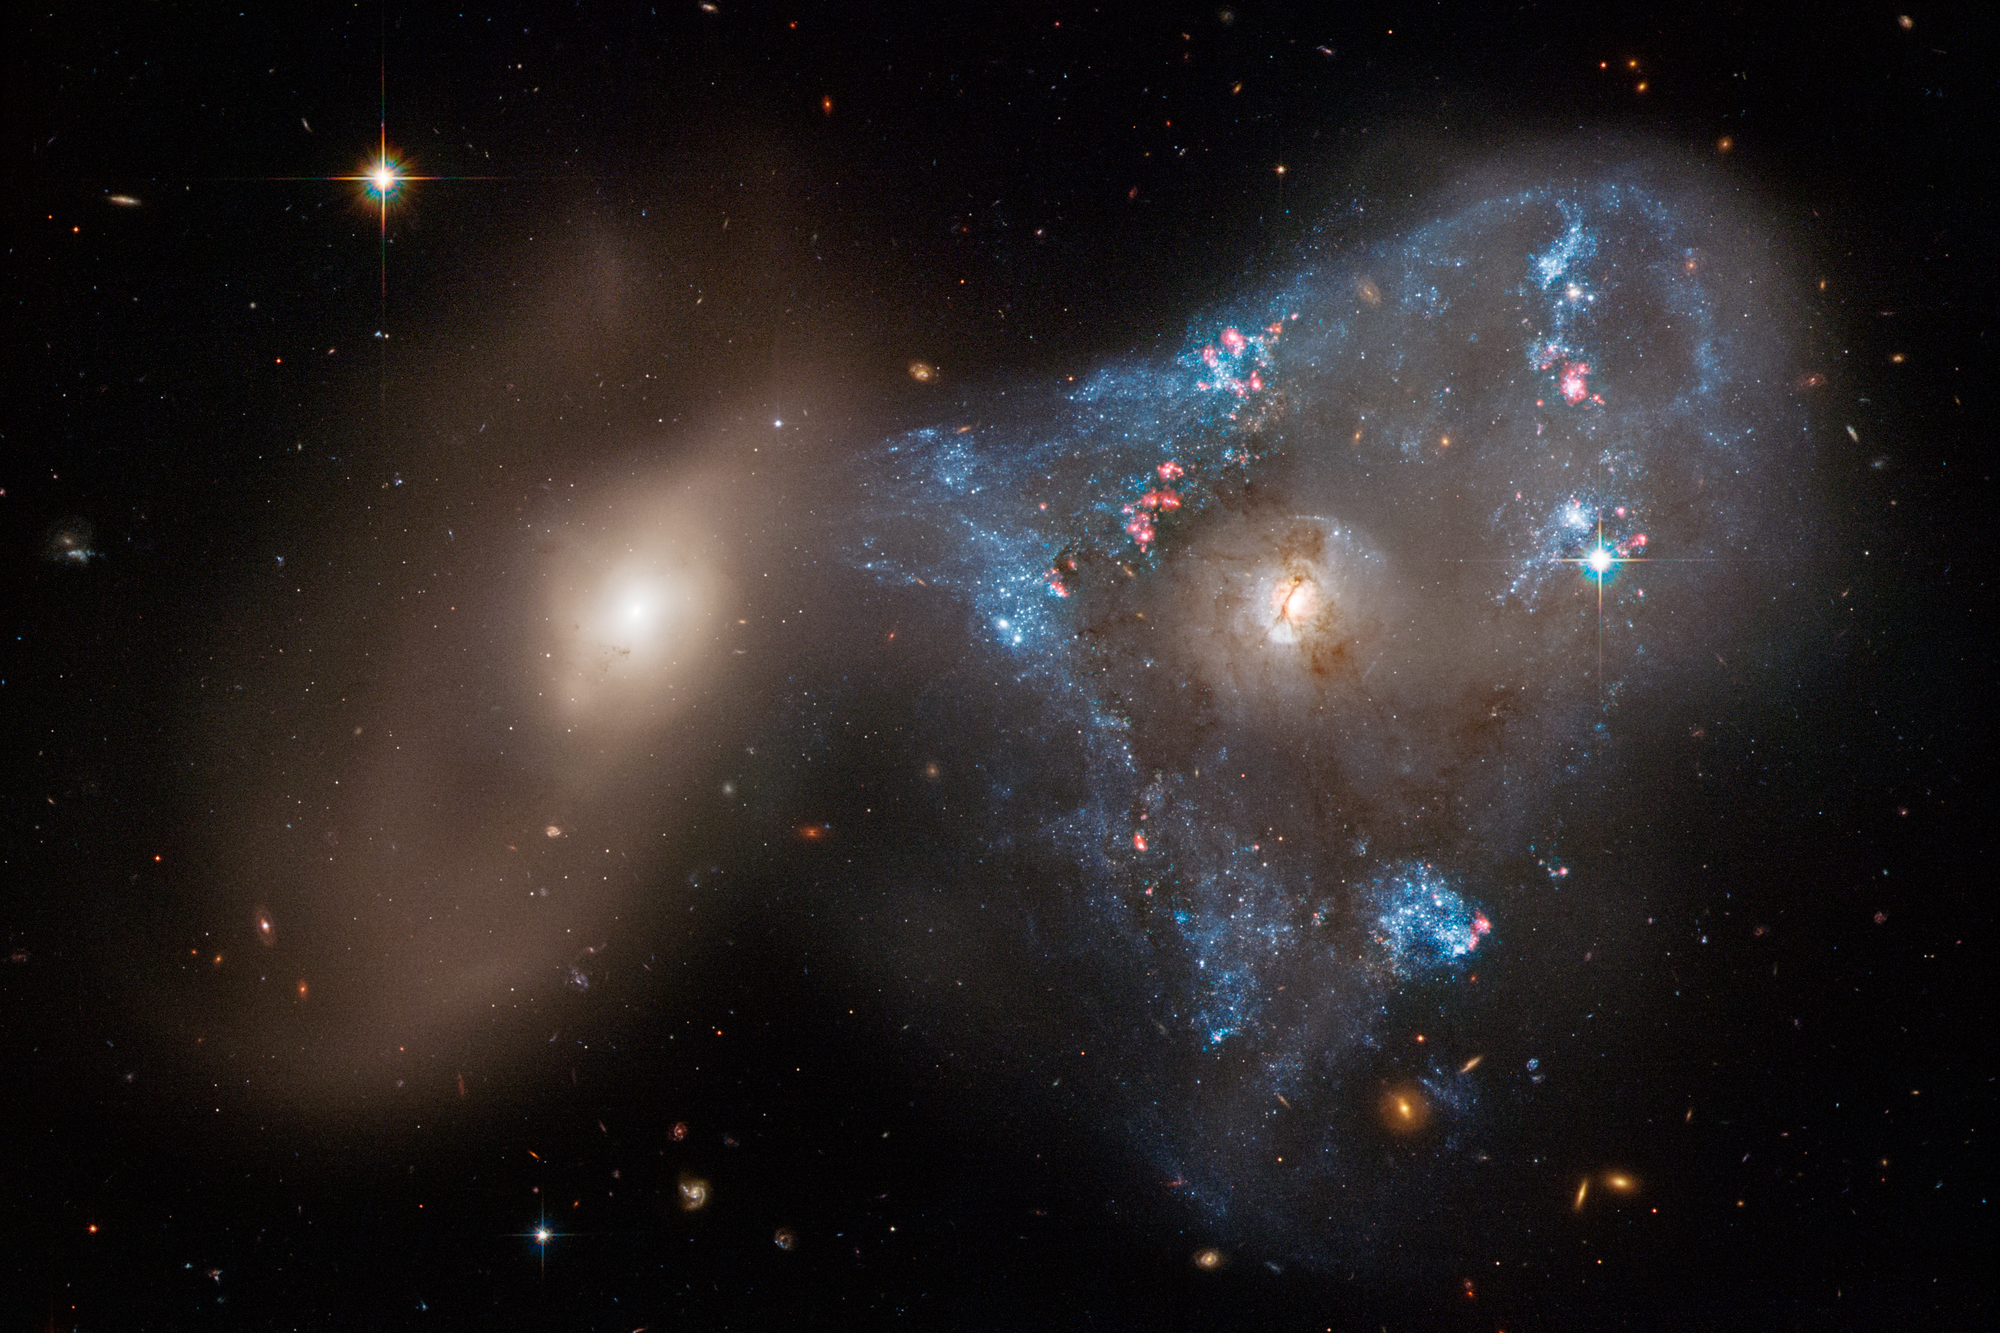 Two galaxies one right one on the left. right galaxy has a blue-white triangular star forming region surrounding it.